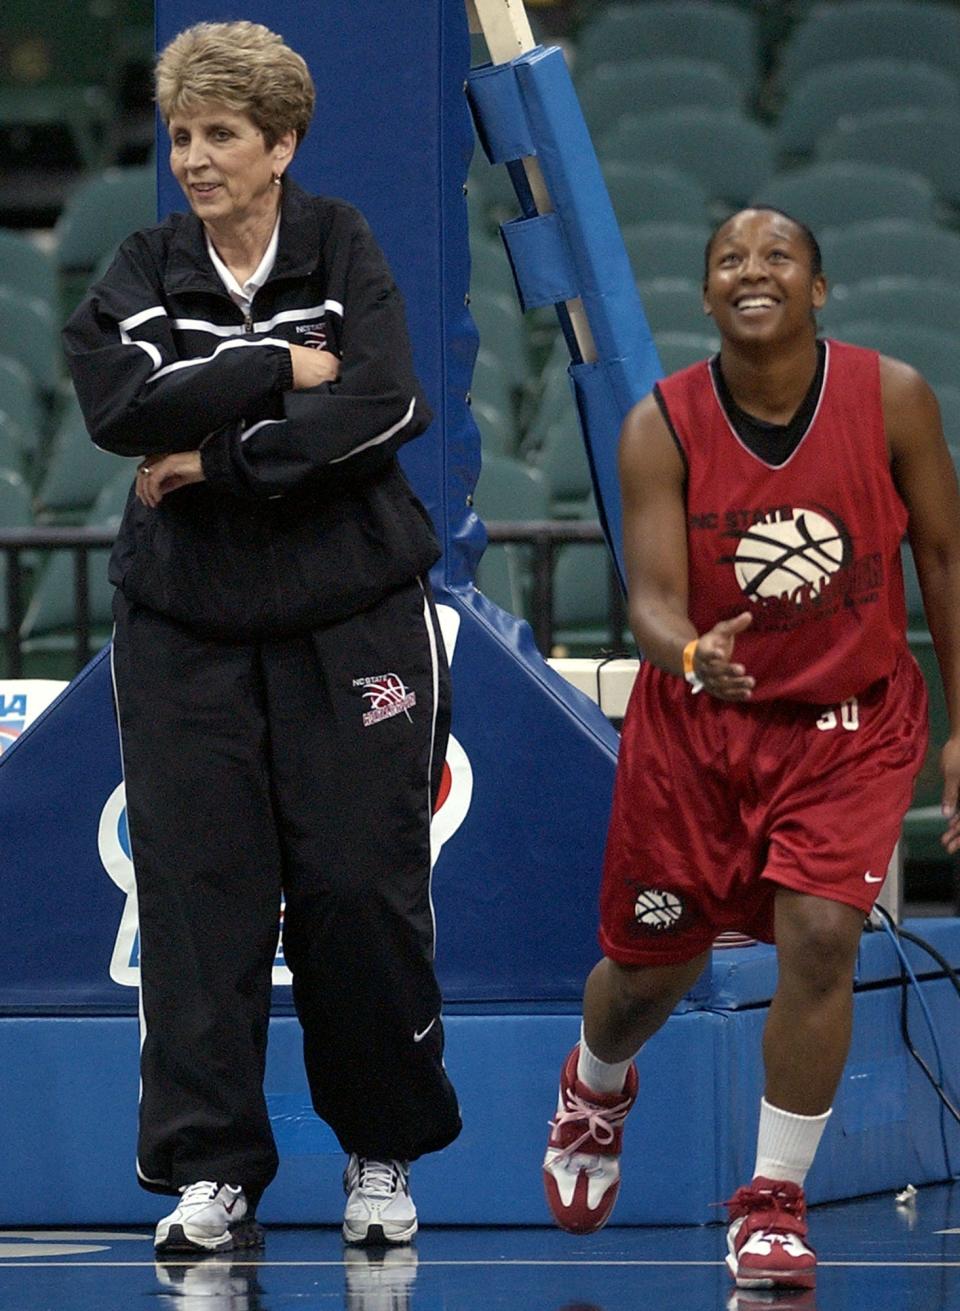 North Carolina State coach Kay Yow, left, and player Kendra Bell, right, laugh during practice Friday, March 18, 2005, in Dallas. N.C. State will take on Middle Tennessee in the first round of the NCAA tournament Saturday. (AP Photo/Tony Gutierrez)